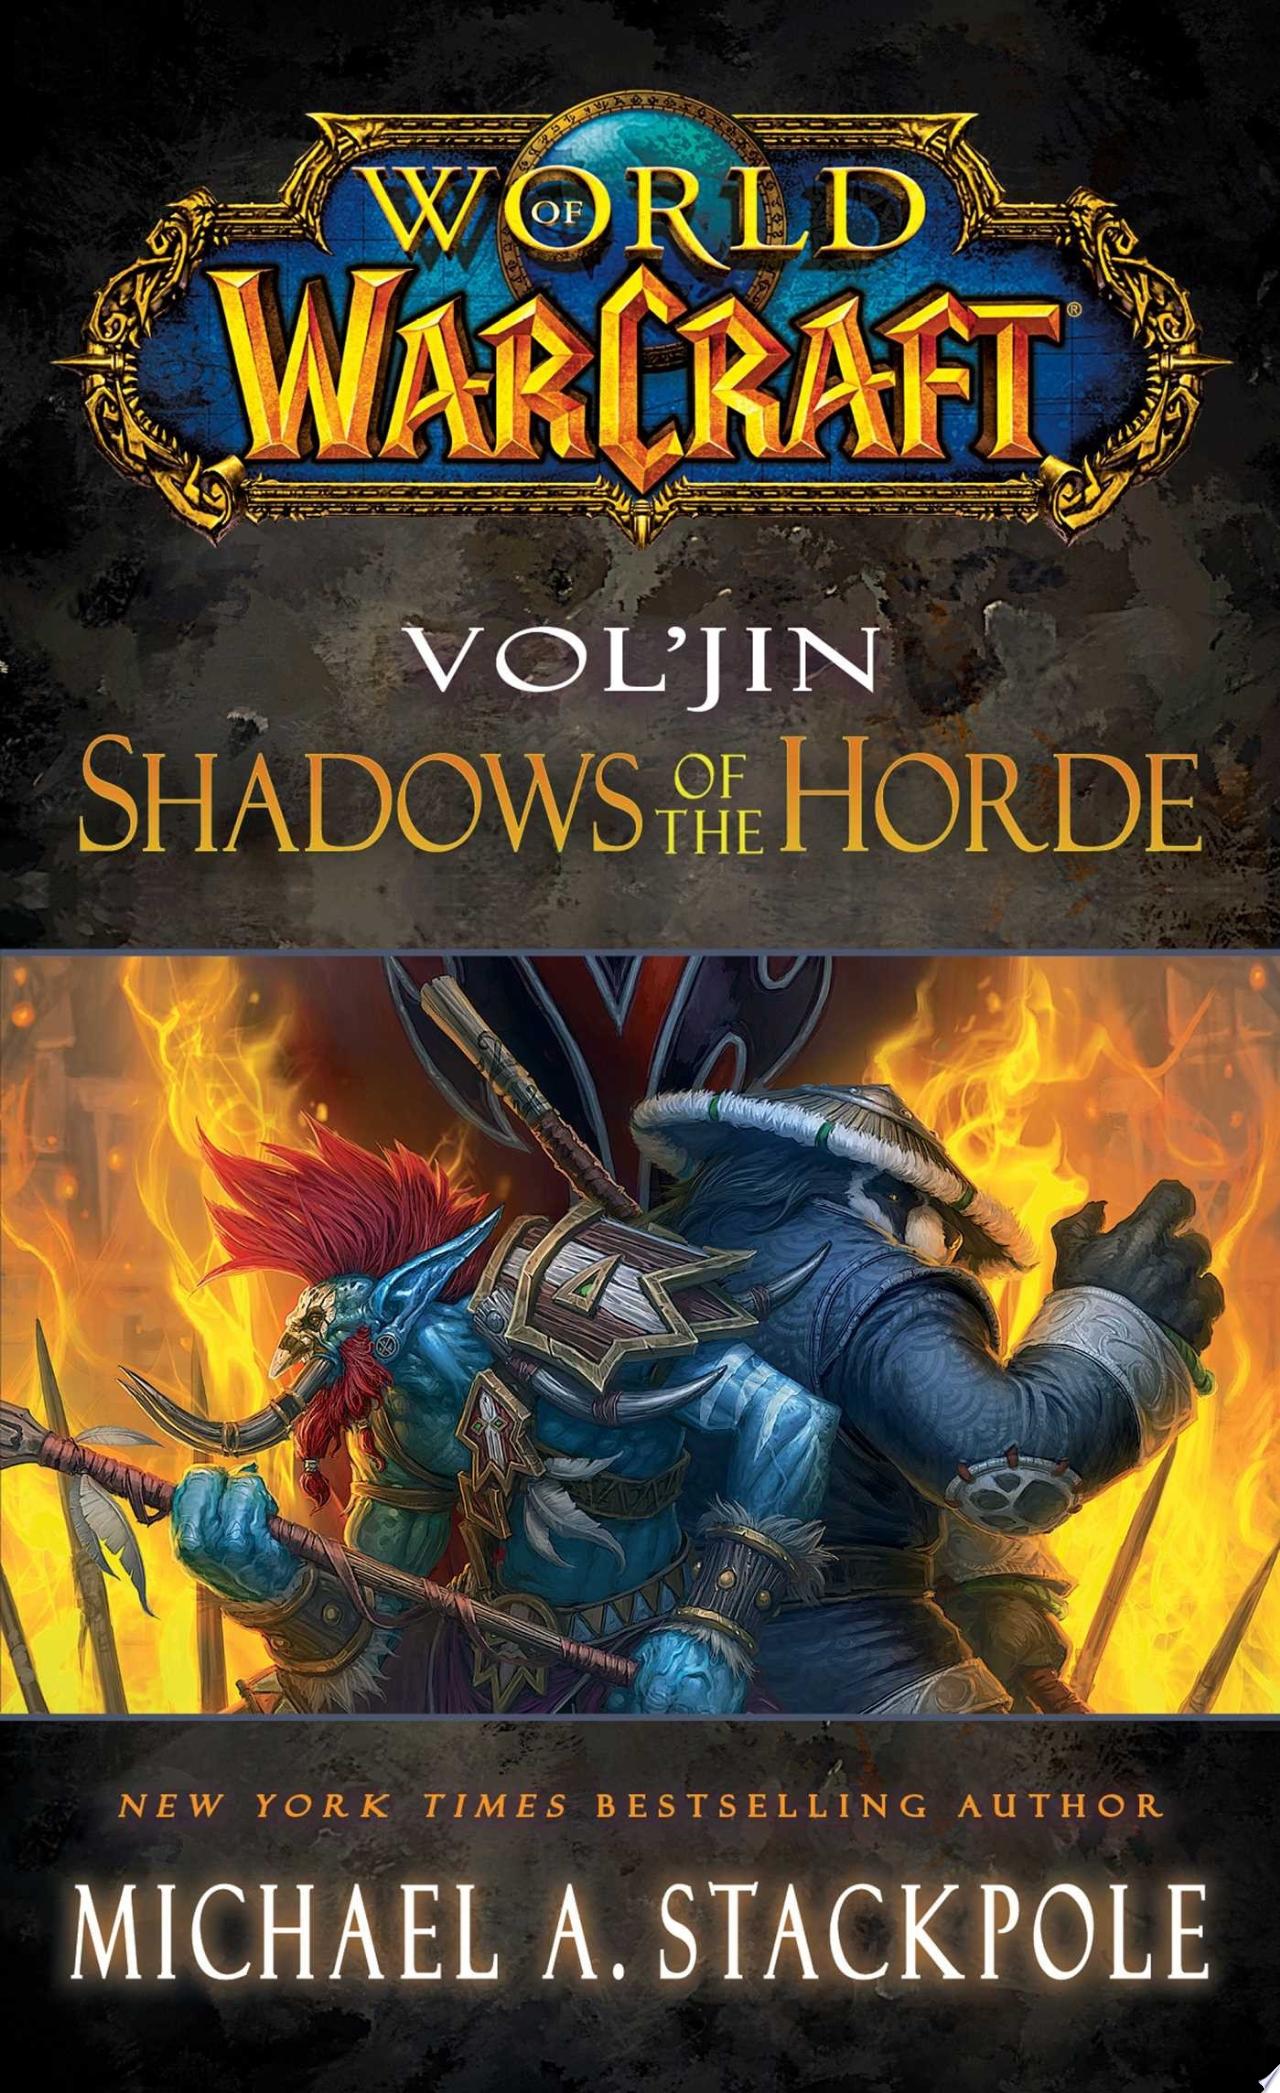 Book Cover for World of Warcraft: Vol'jin: Shadows of the Horde